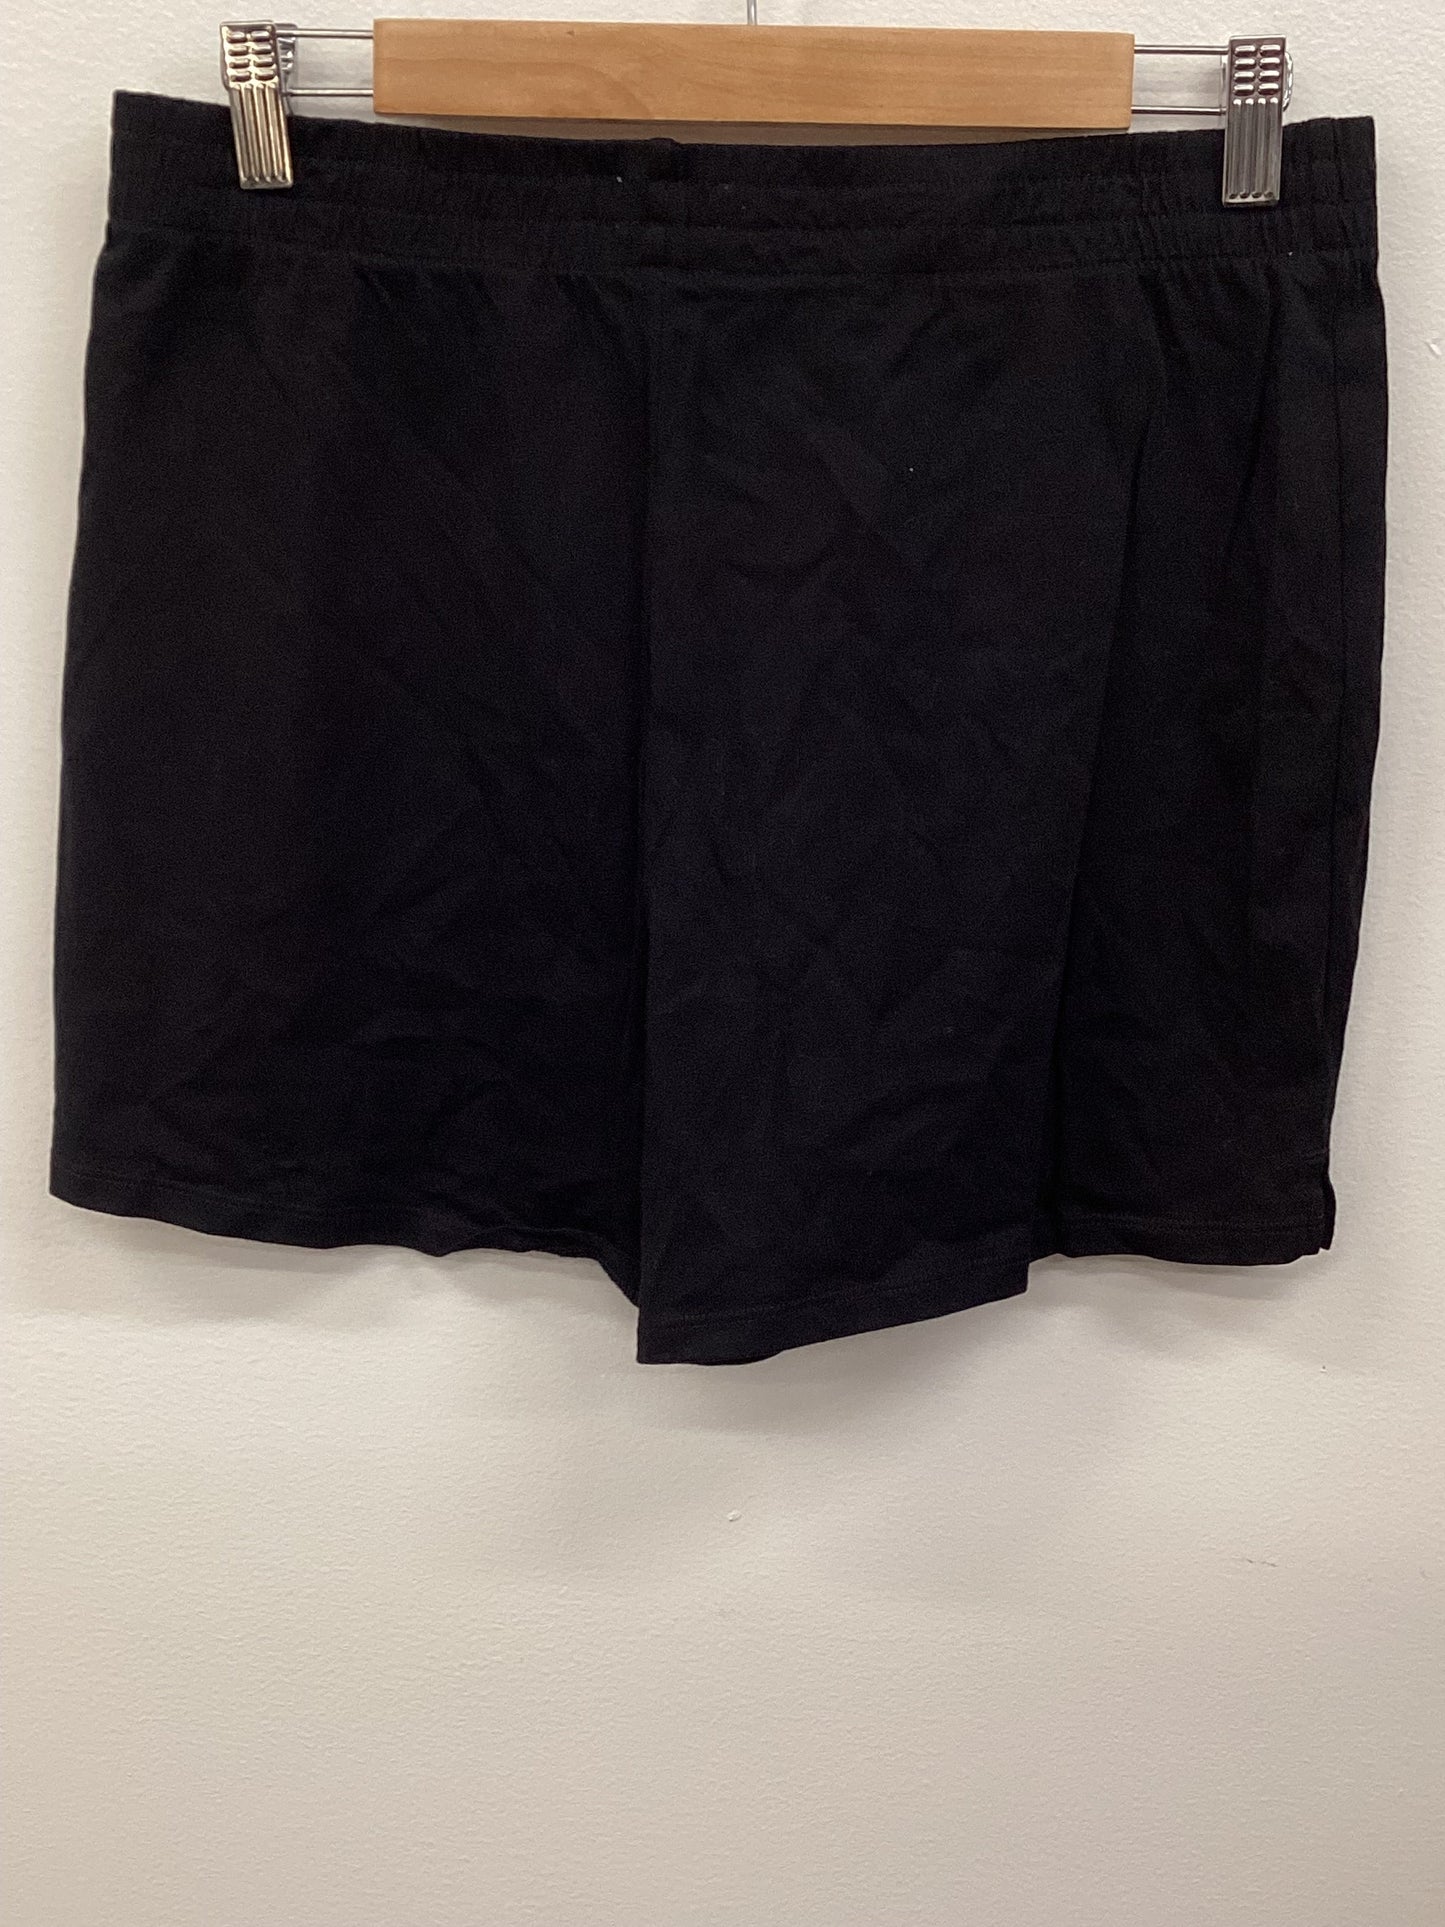 Shorts By Wilfred  Size: M